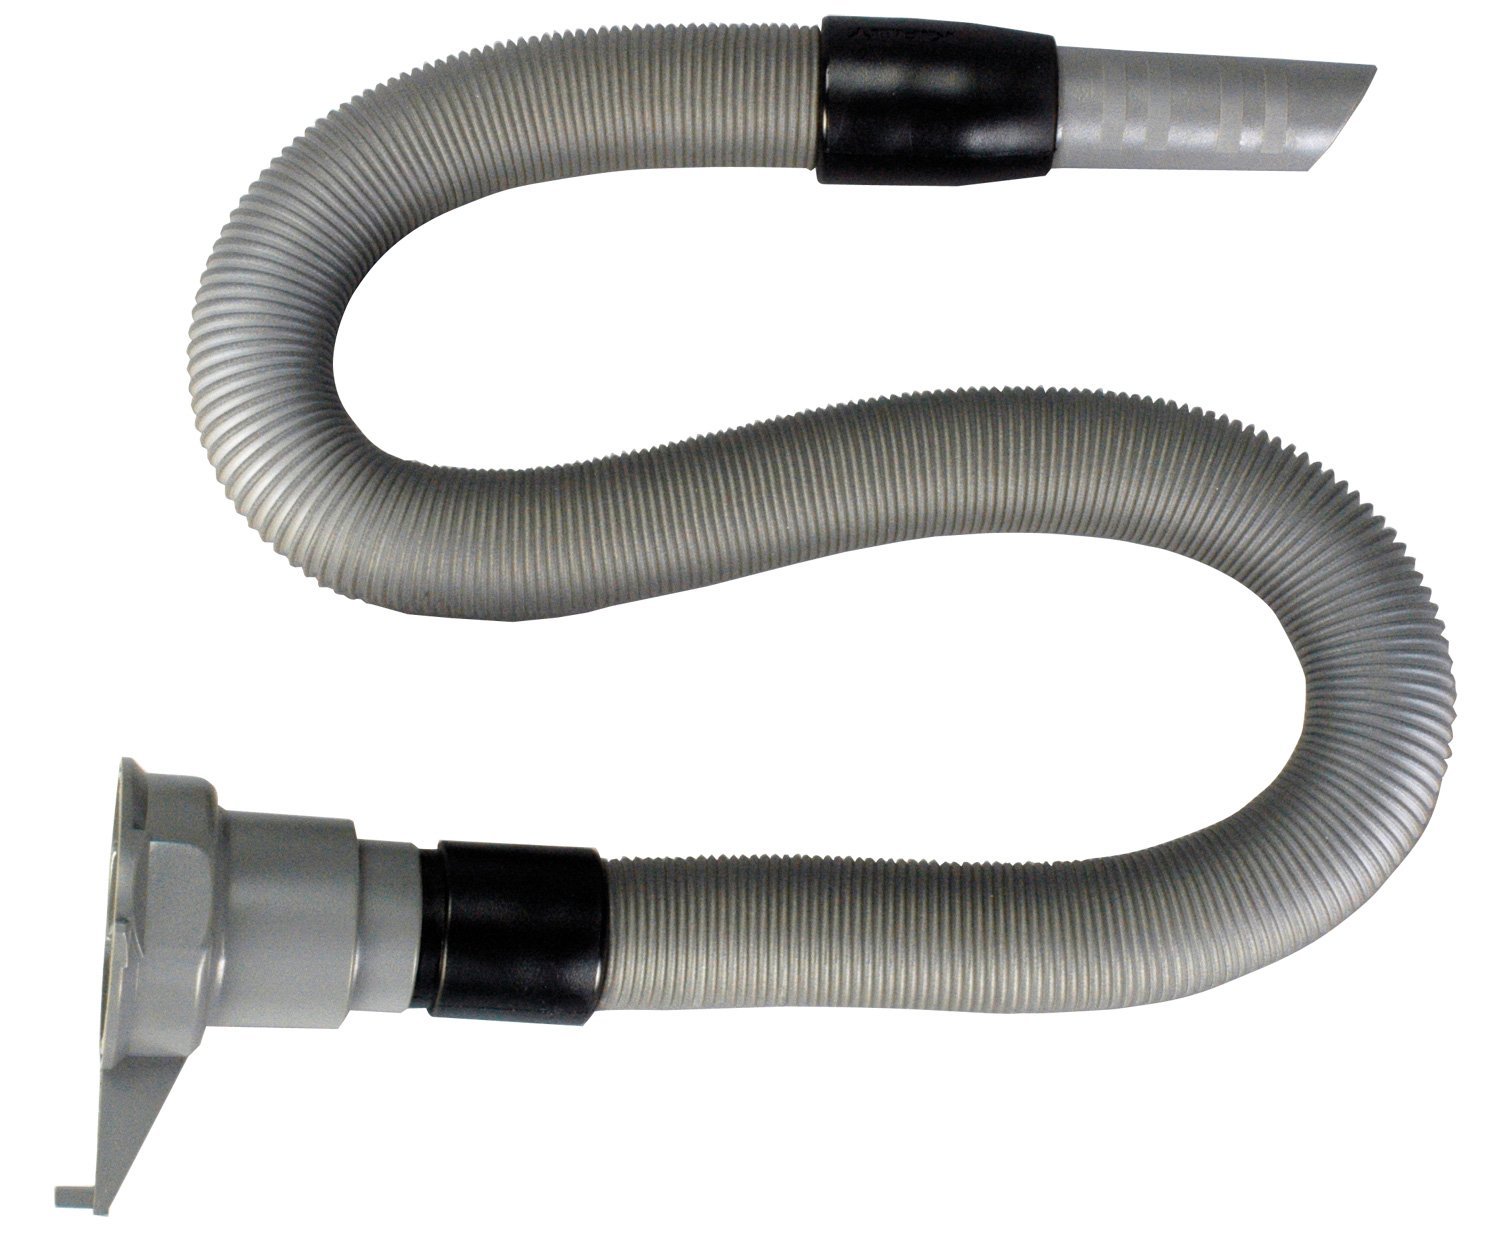 Primary image for Kirby 225406S G5-Se Ii Stretch Hose 12', Black